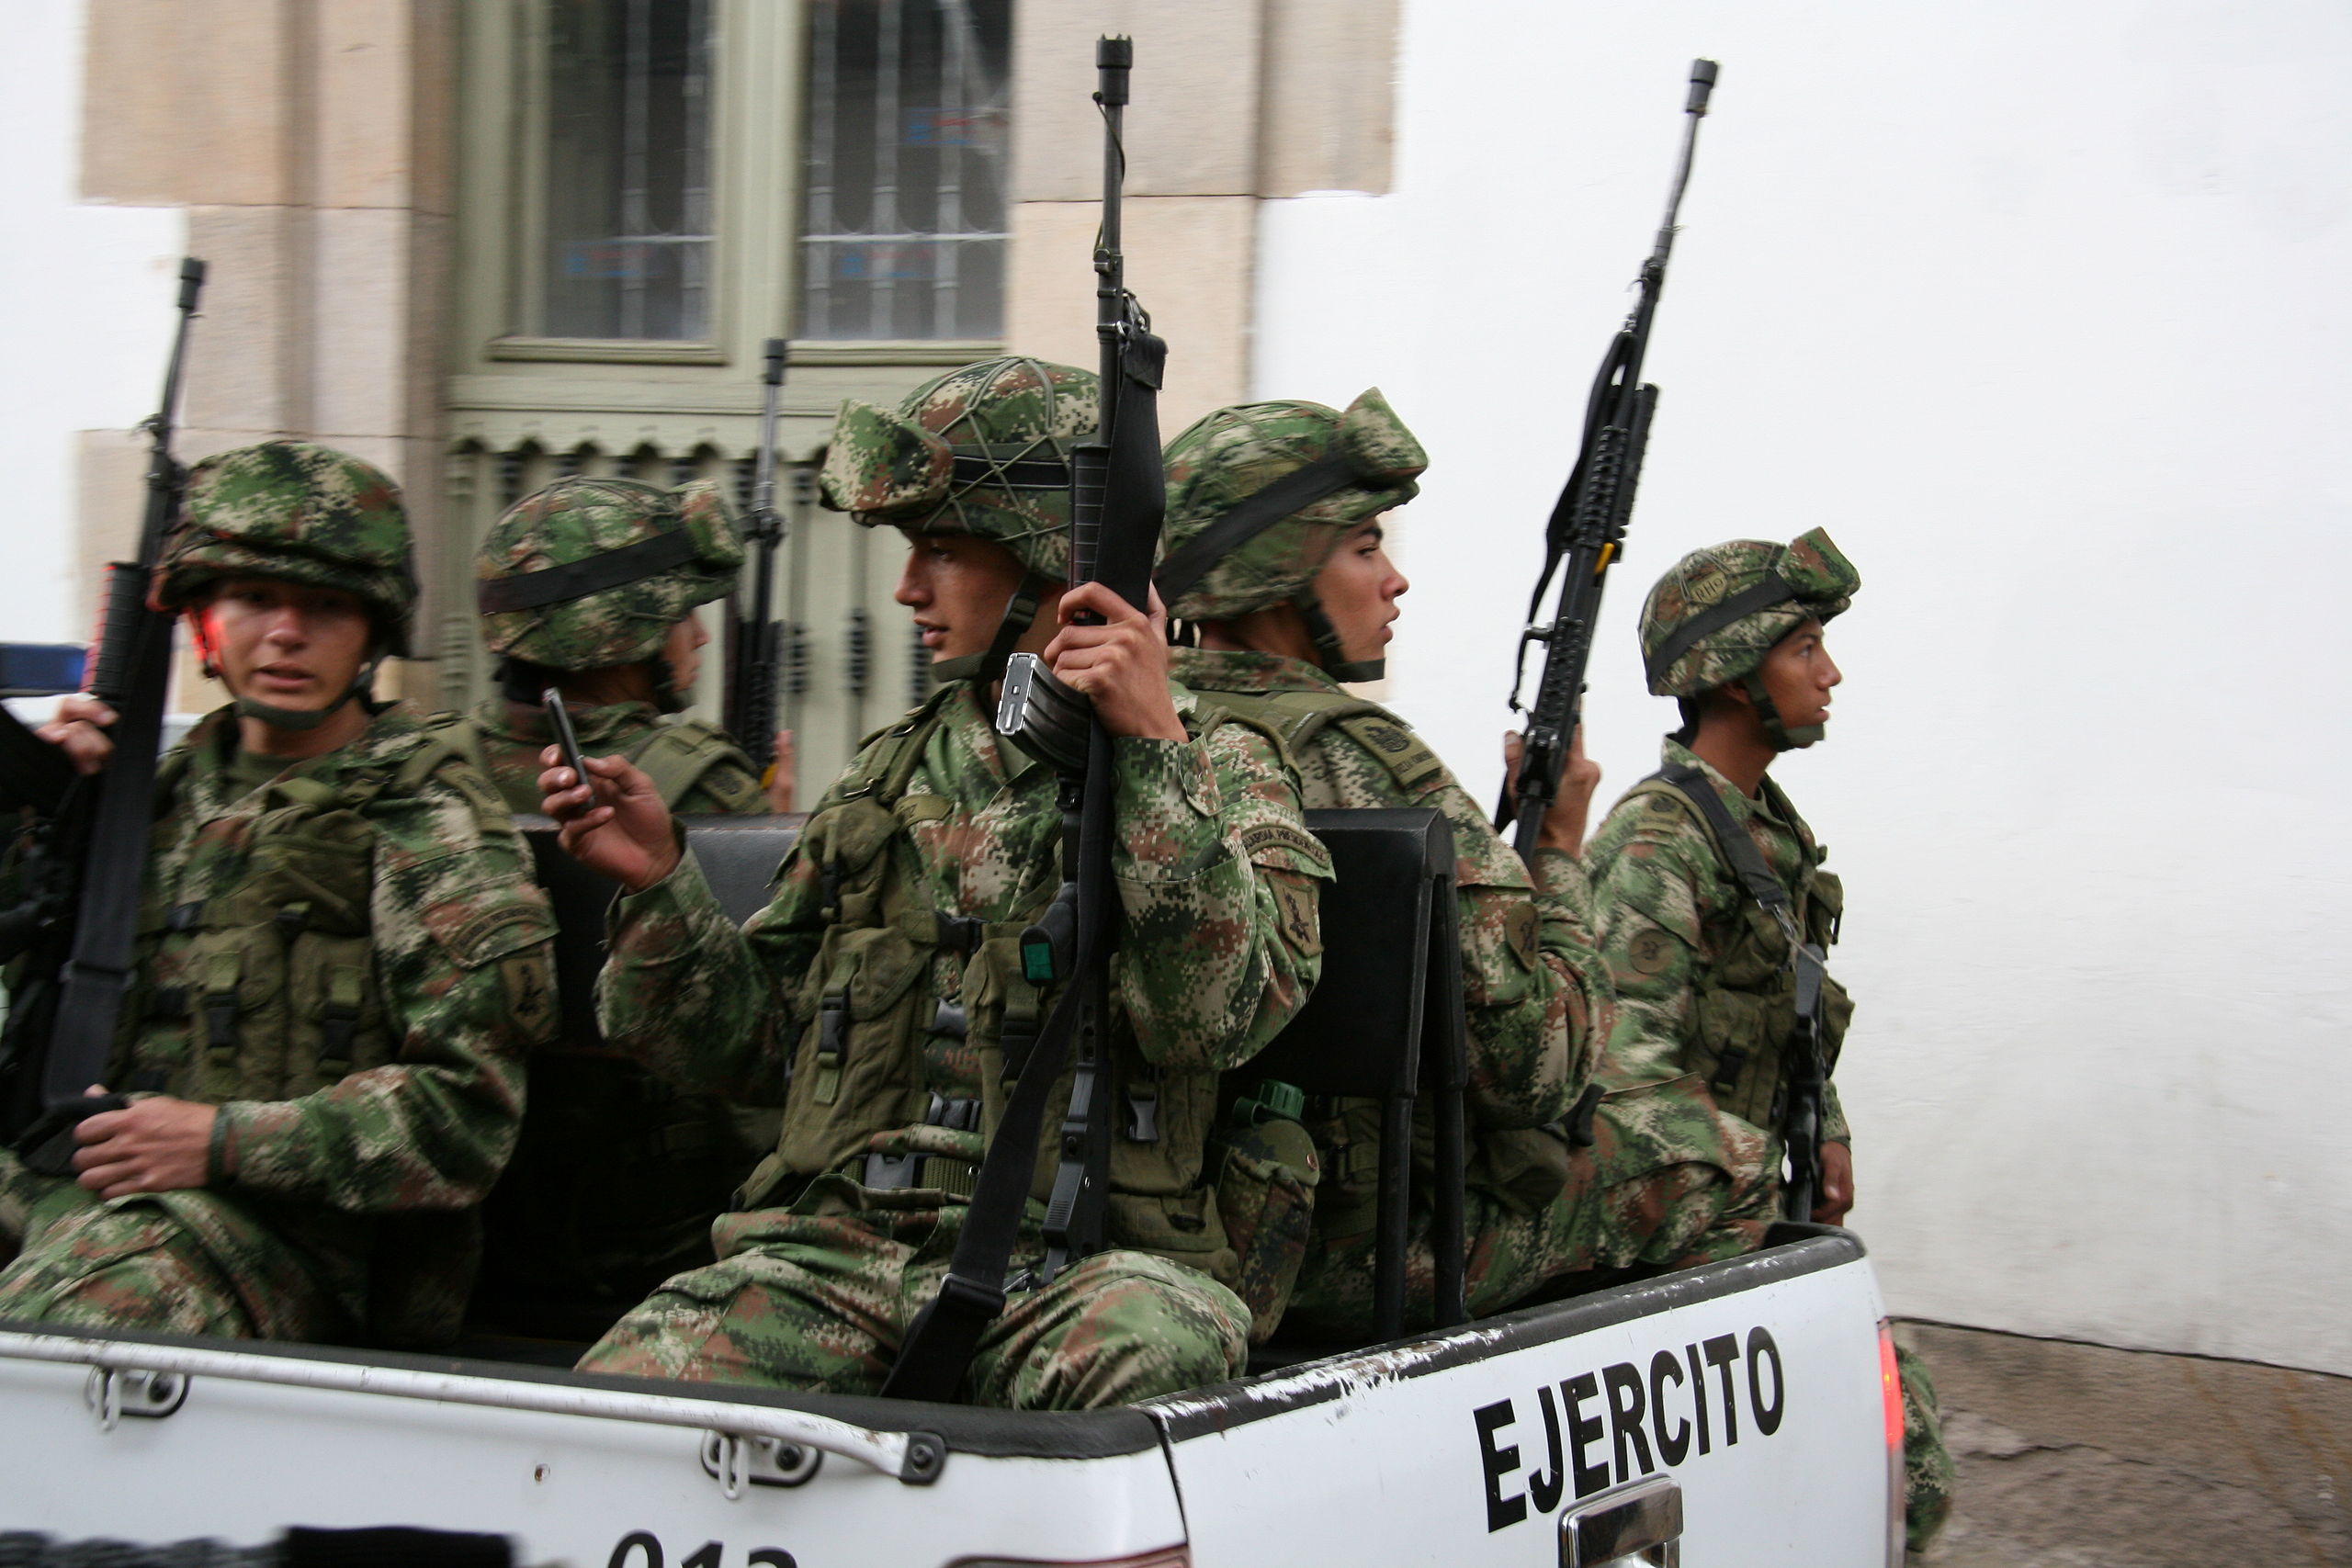 Military_Police_of_Colombia_Image_Pipeafcr_Wikimedia_Commons.jpg